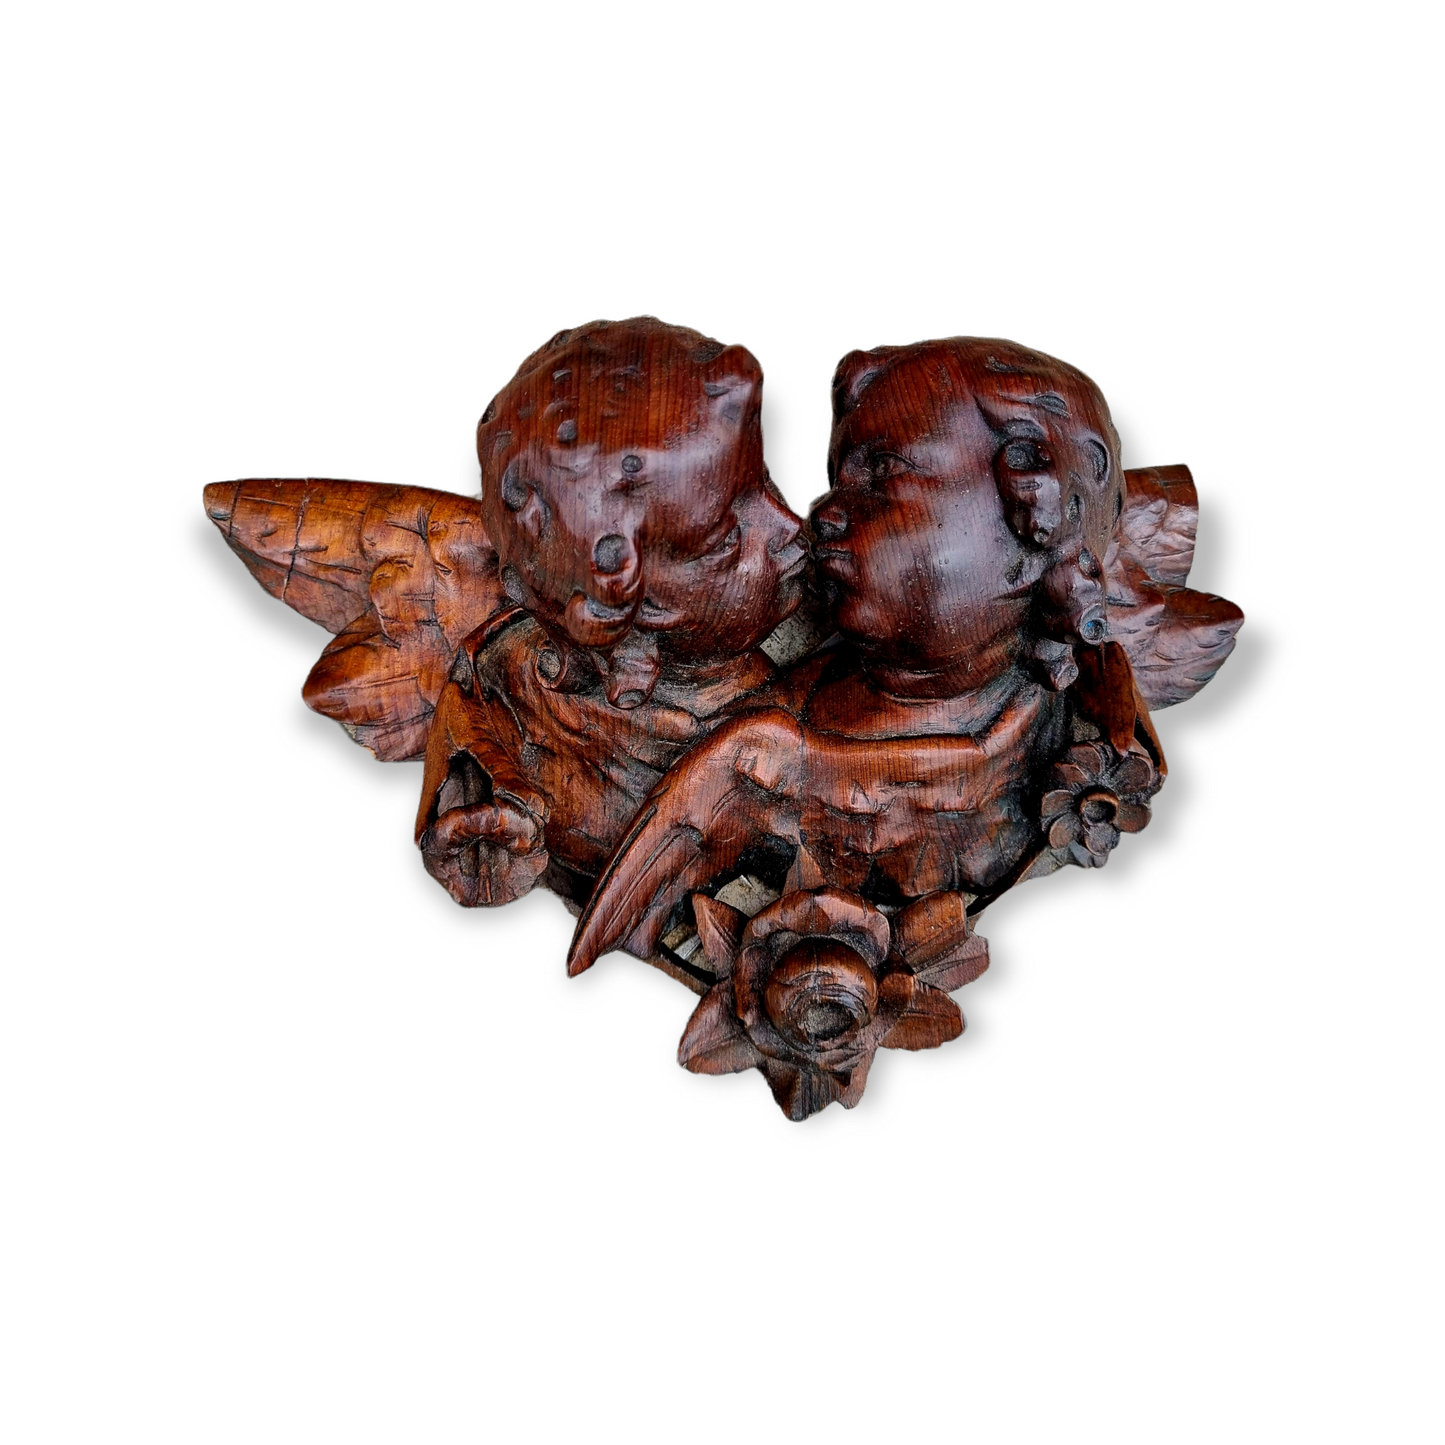 Decorative 19th Century Antique Carved Pine Depiction of Two Winged Cherubs / Putti Kissing